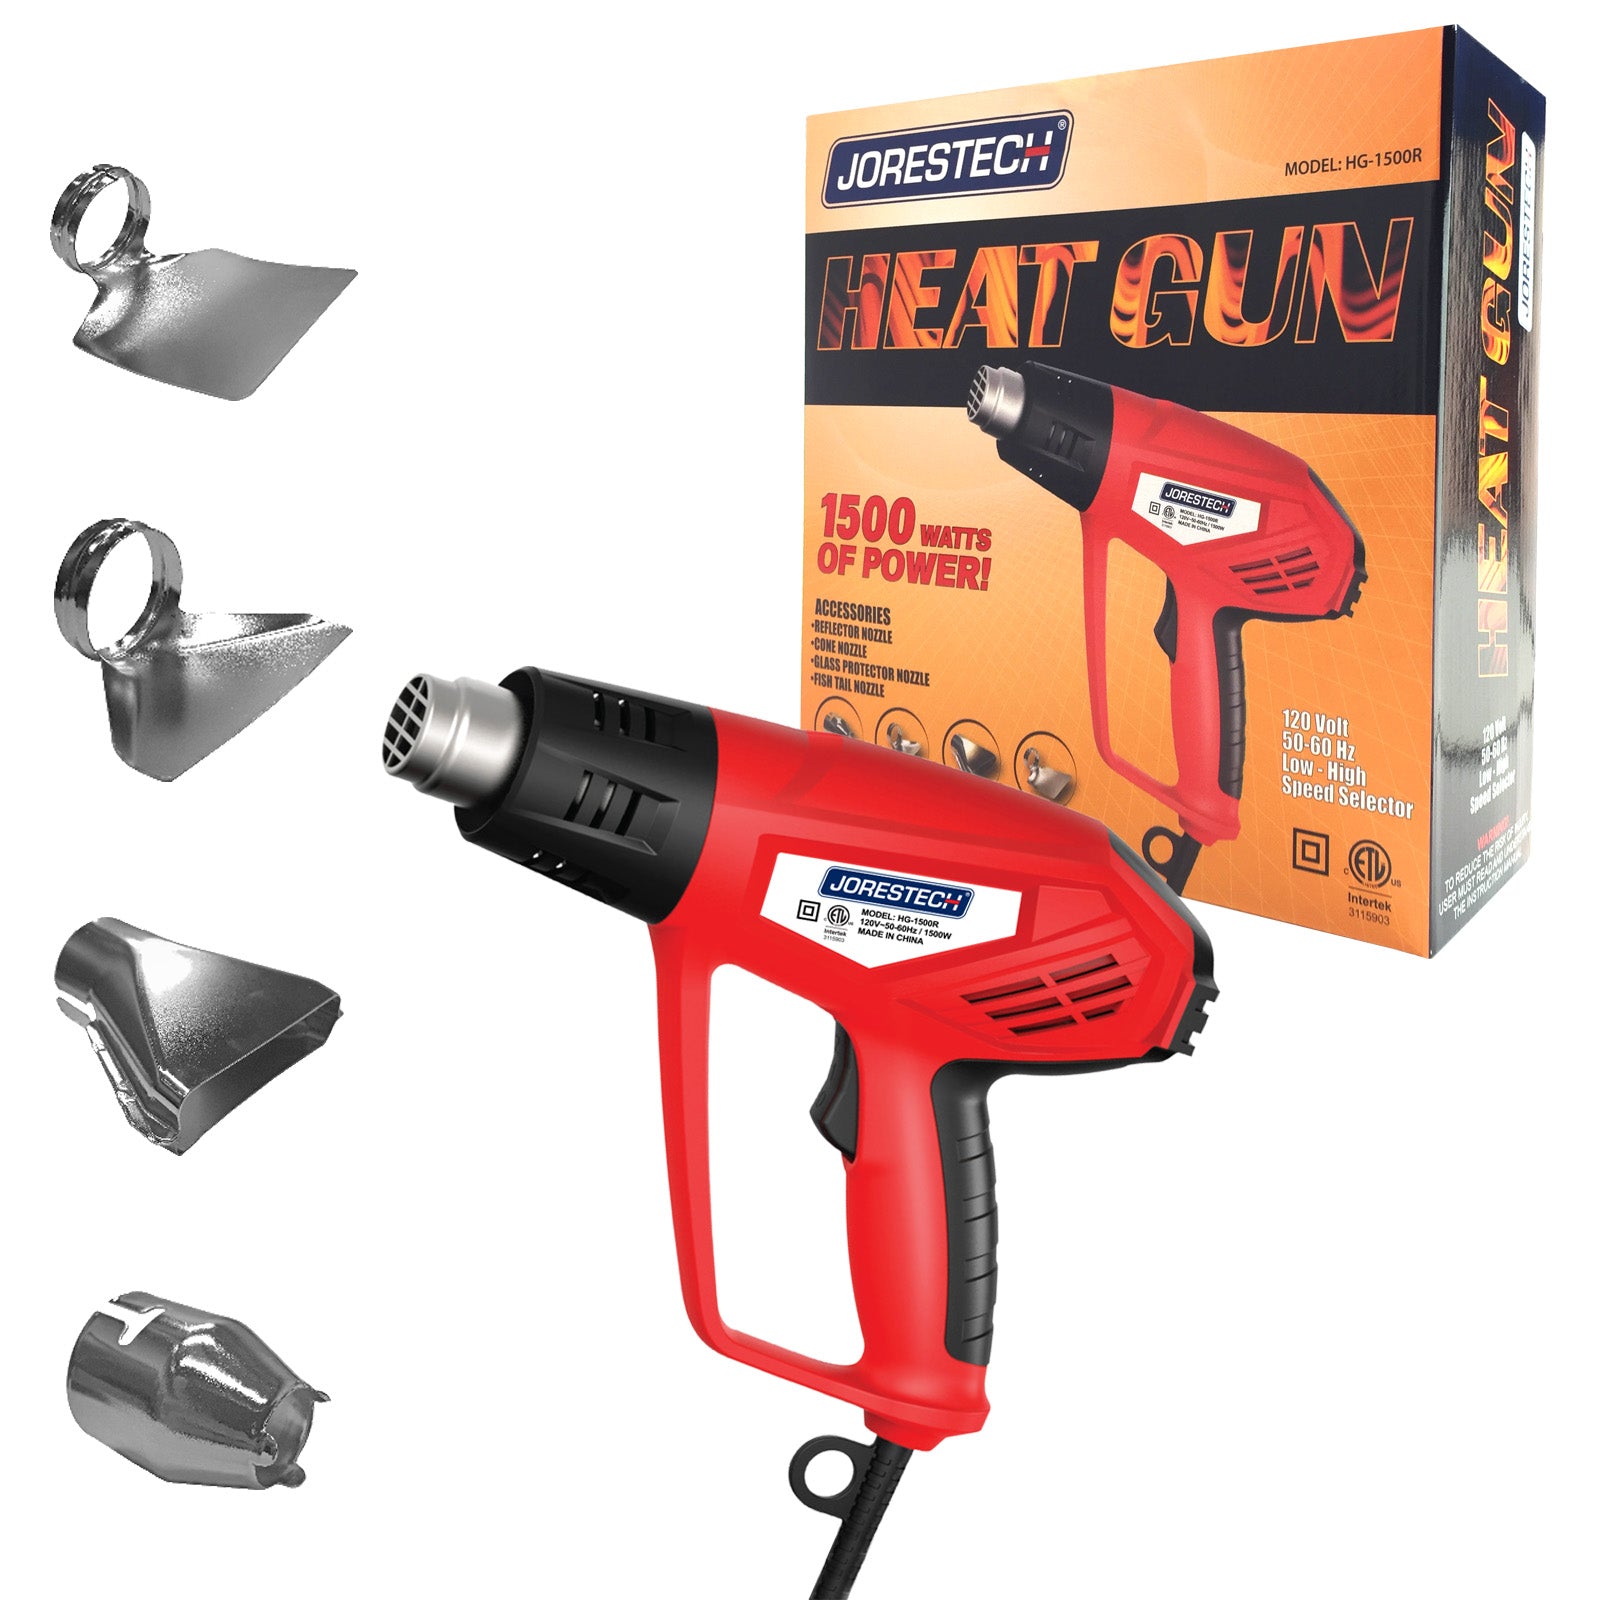 Red colored shrink wrapping heat gun next to its packaging box. Also shows the four included nozzle tips (reflector nozzle, cone nozzle, glass protector nozzle, and fish tail nozzle)